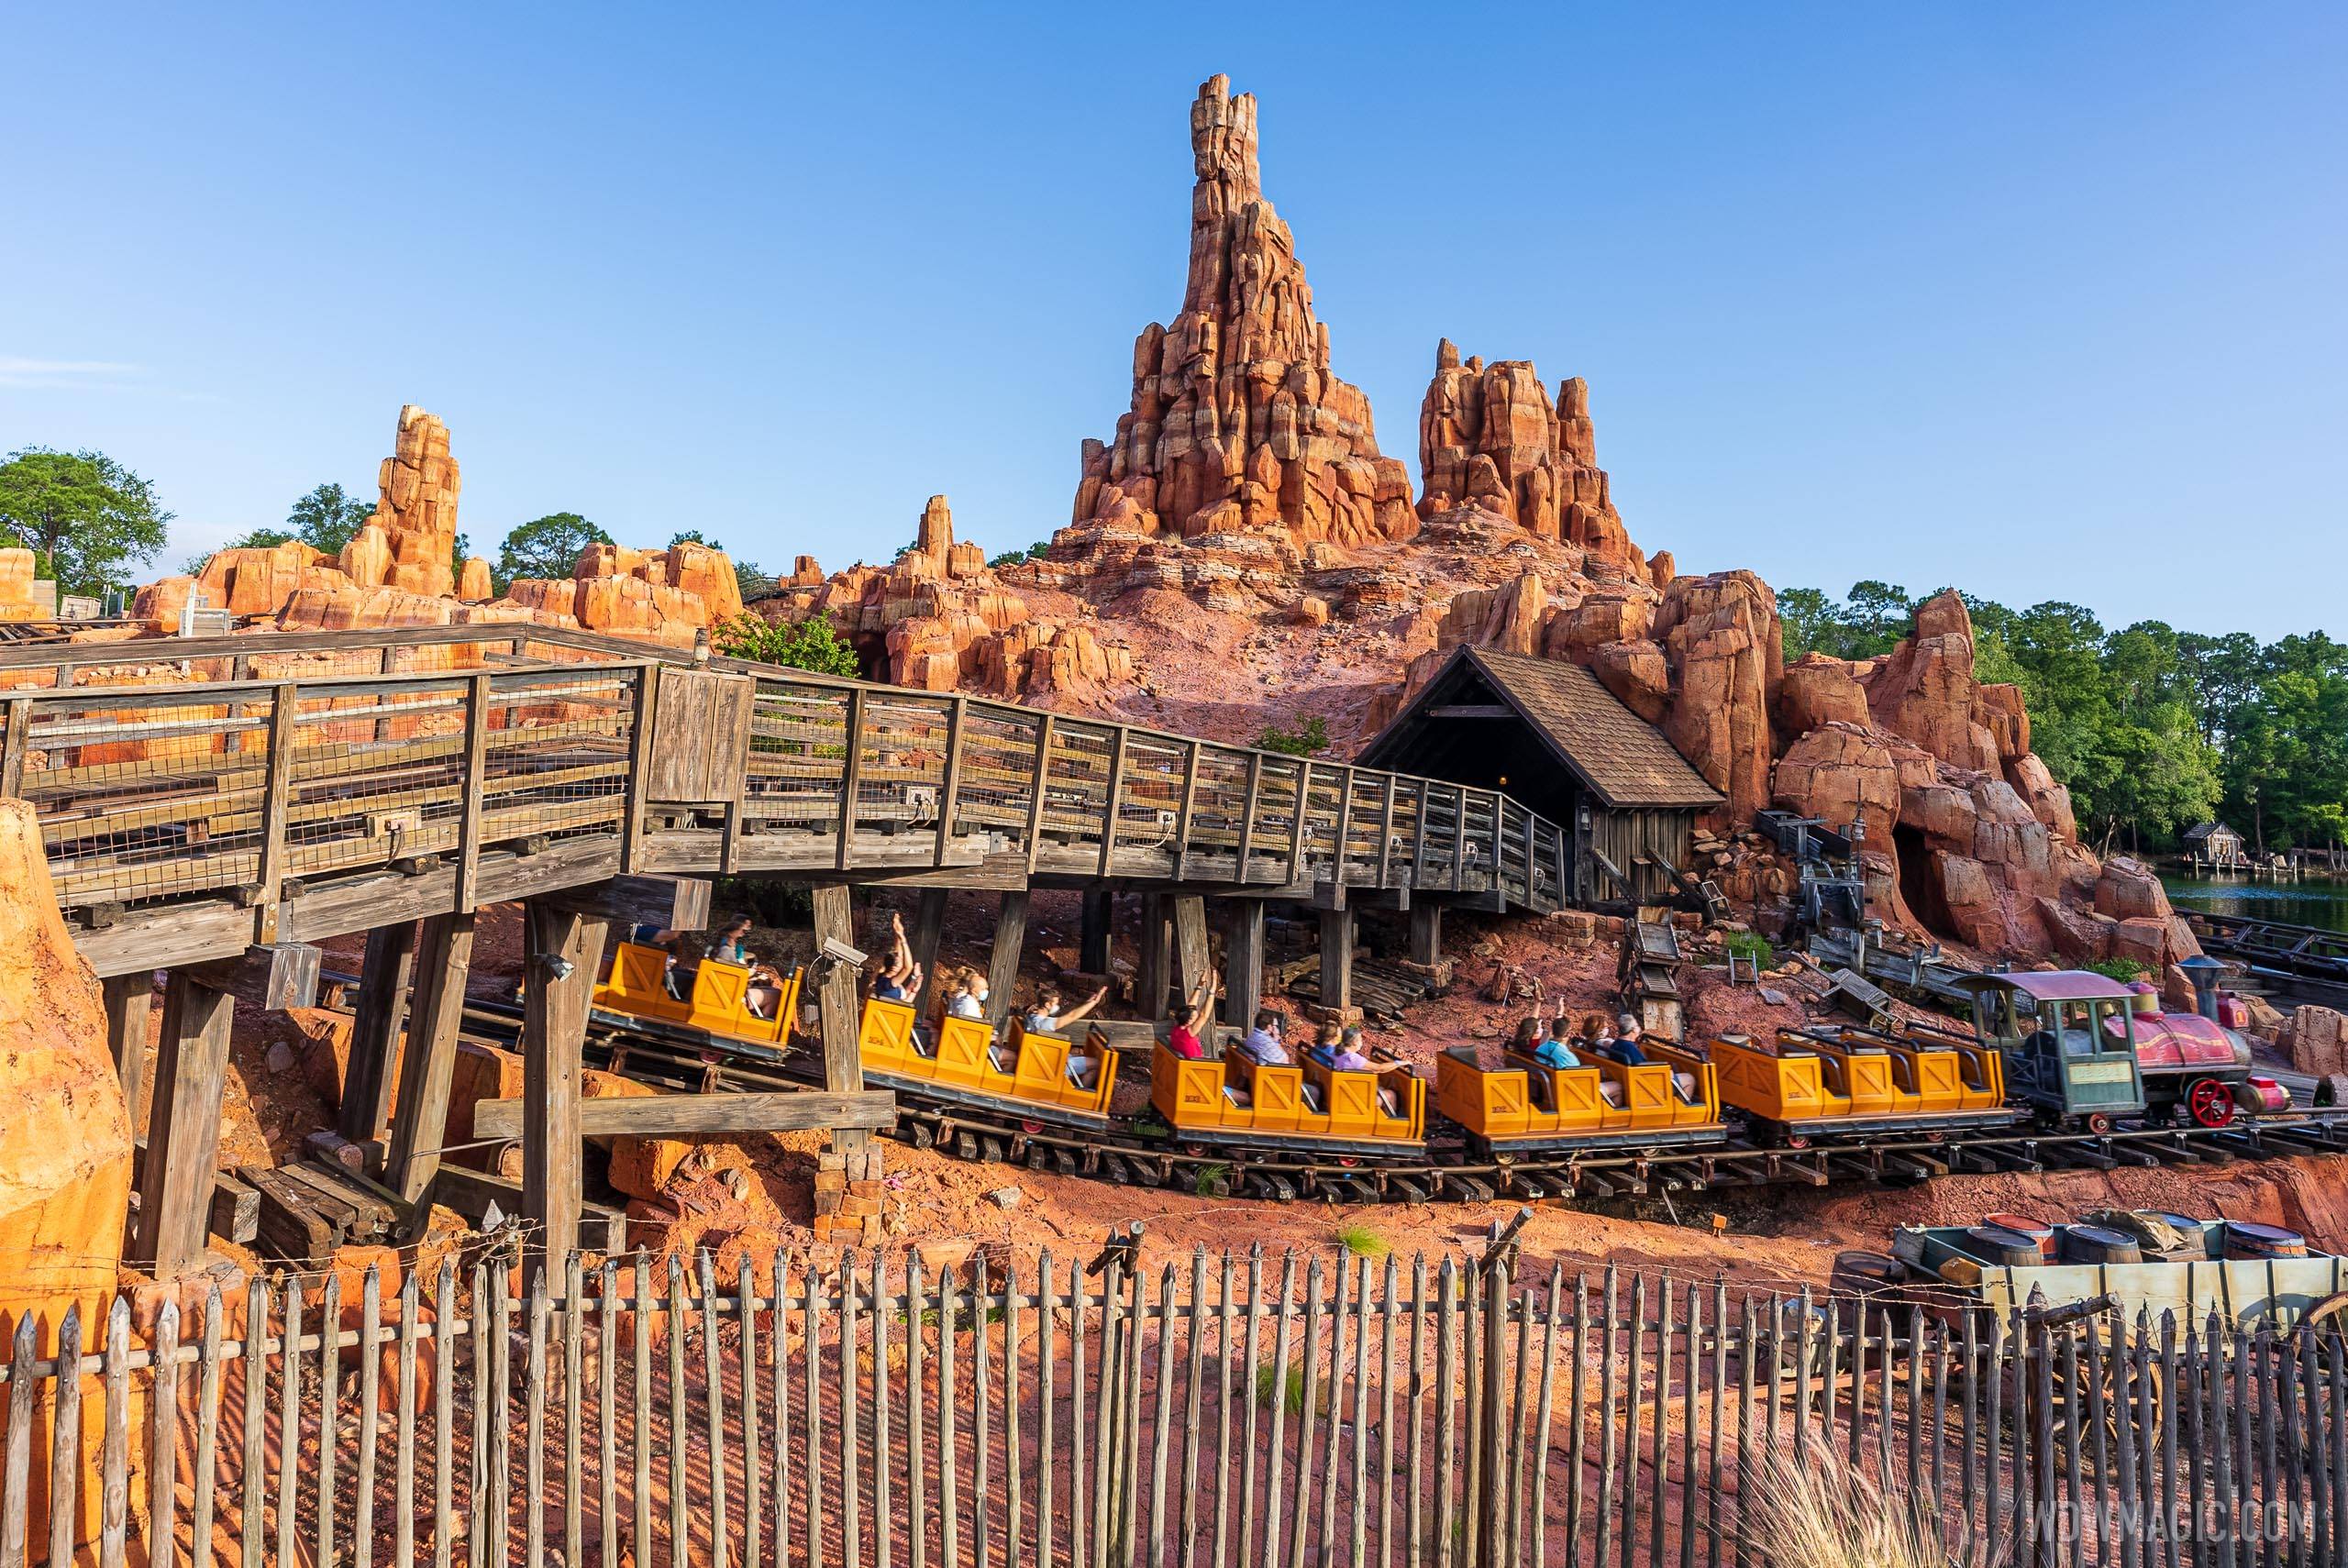 Big Thunder Mountain Overview  Disney's Magic Kingdom Attractions